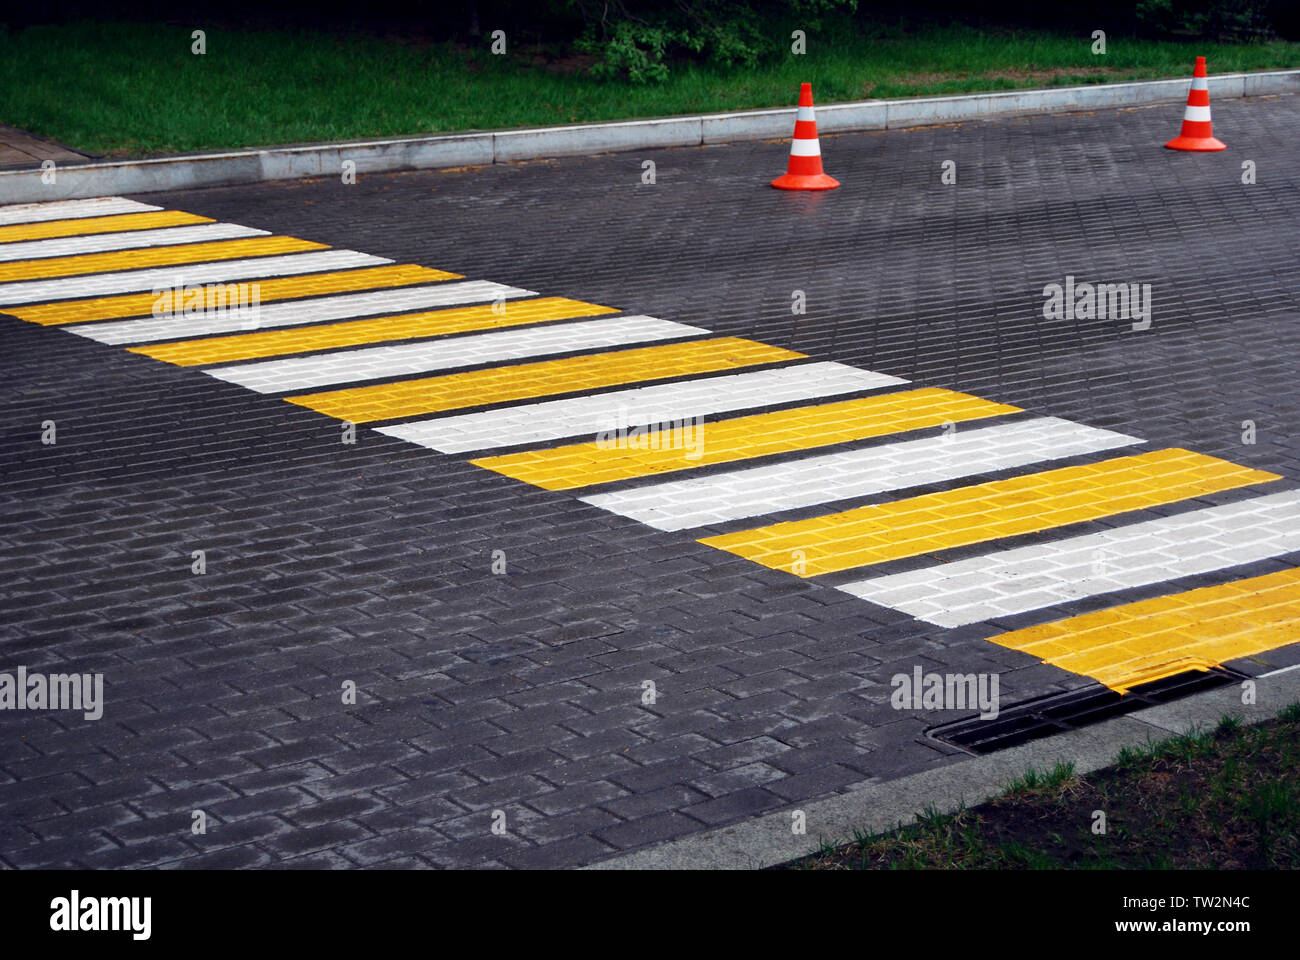 Pedestrian crossing and traffic cones on a paved road on rainy day Stock Photo